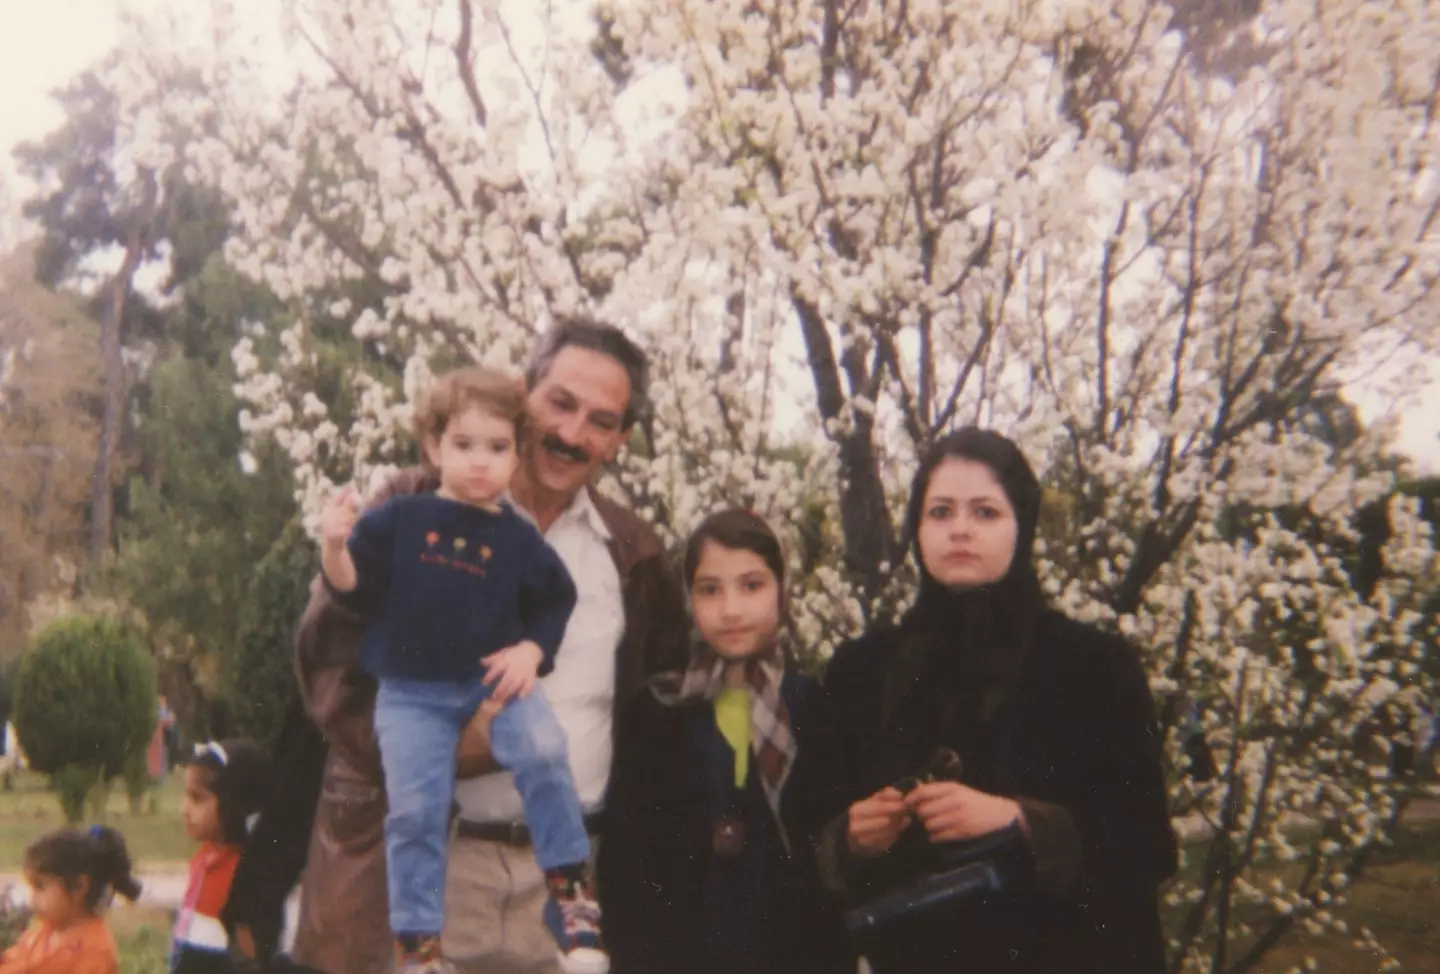 Sahar aged 10, with her mum, dad and sister. The family fled Iran when she was 12.